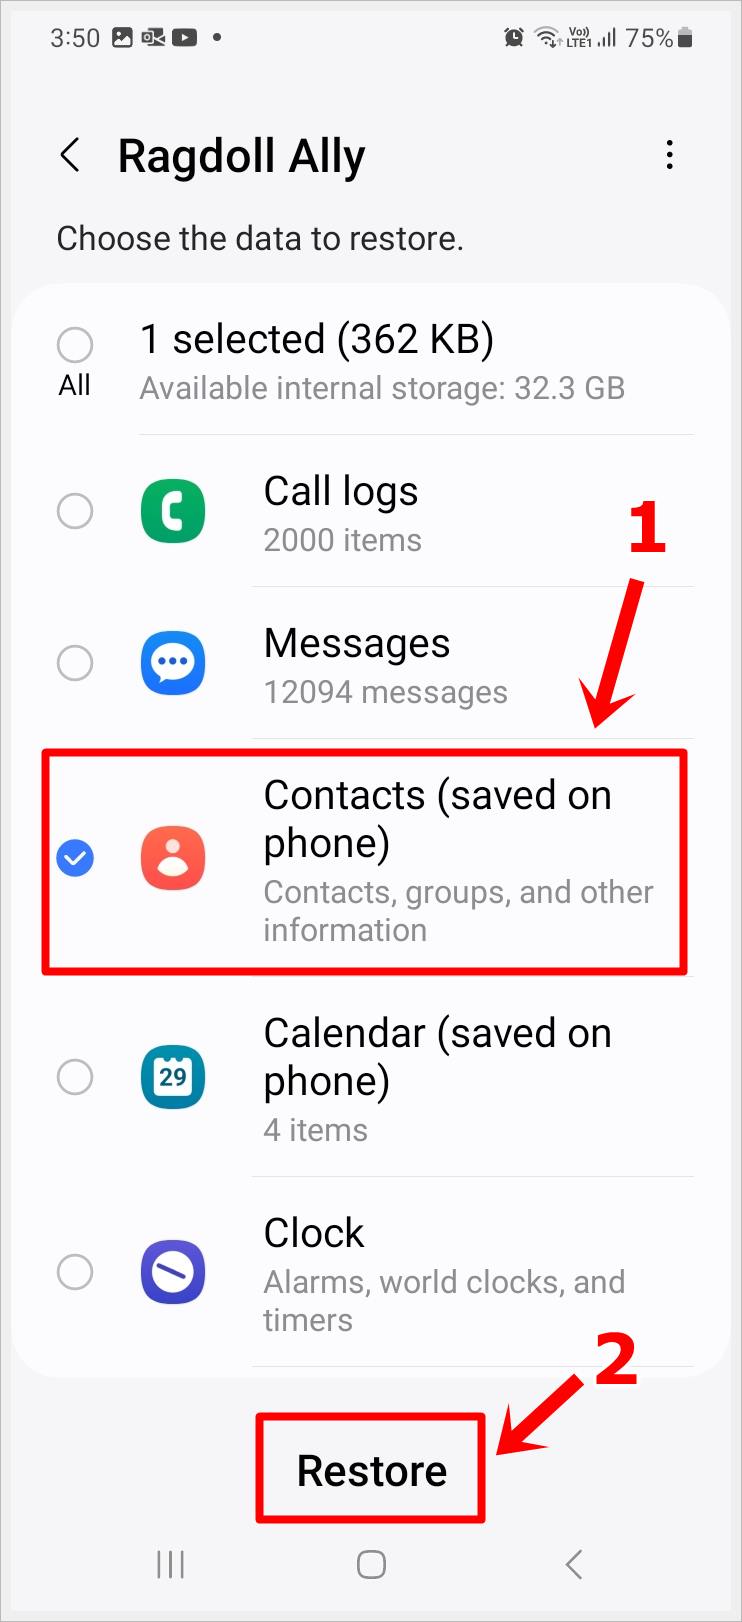 This is a screenshot from a Samsung Galaxy phone showing that 'Contacts' has been selected as the data to be restored, with the 'Restore' button at the bottom highlighted.